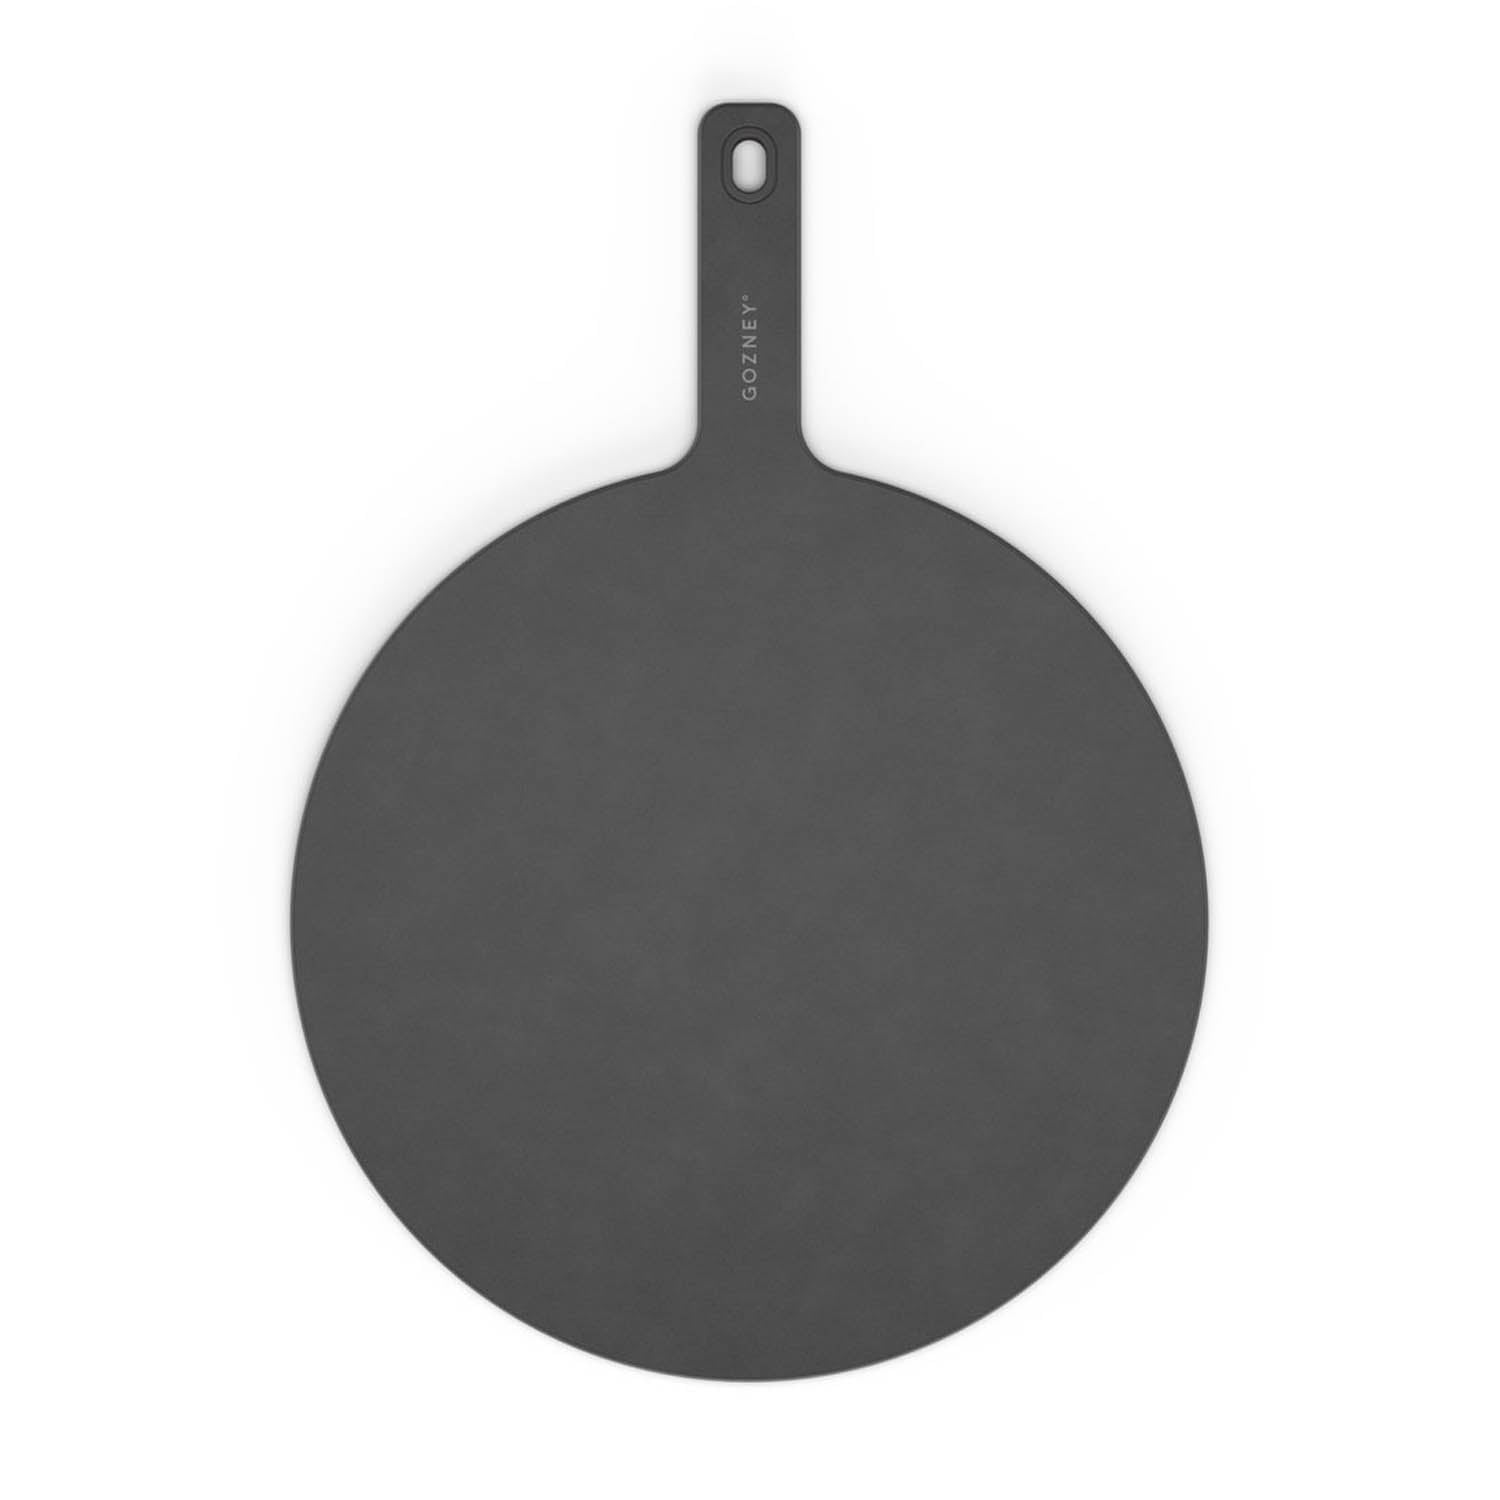 Gozney Pizza Server Black Fiber Board Handcrafted And Durable Easy To Clean